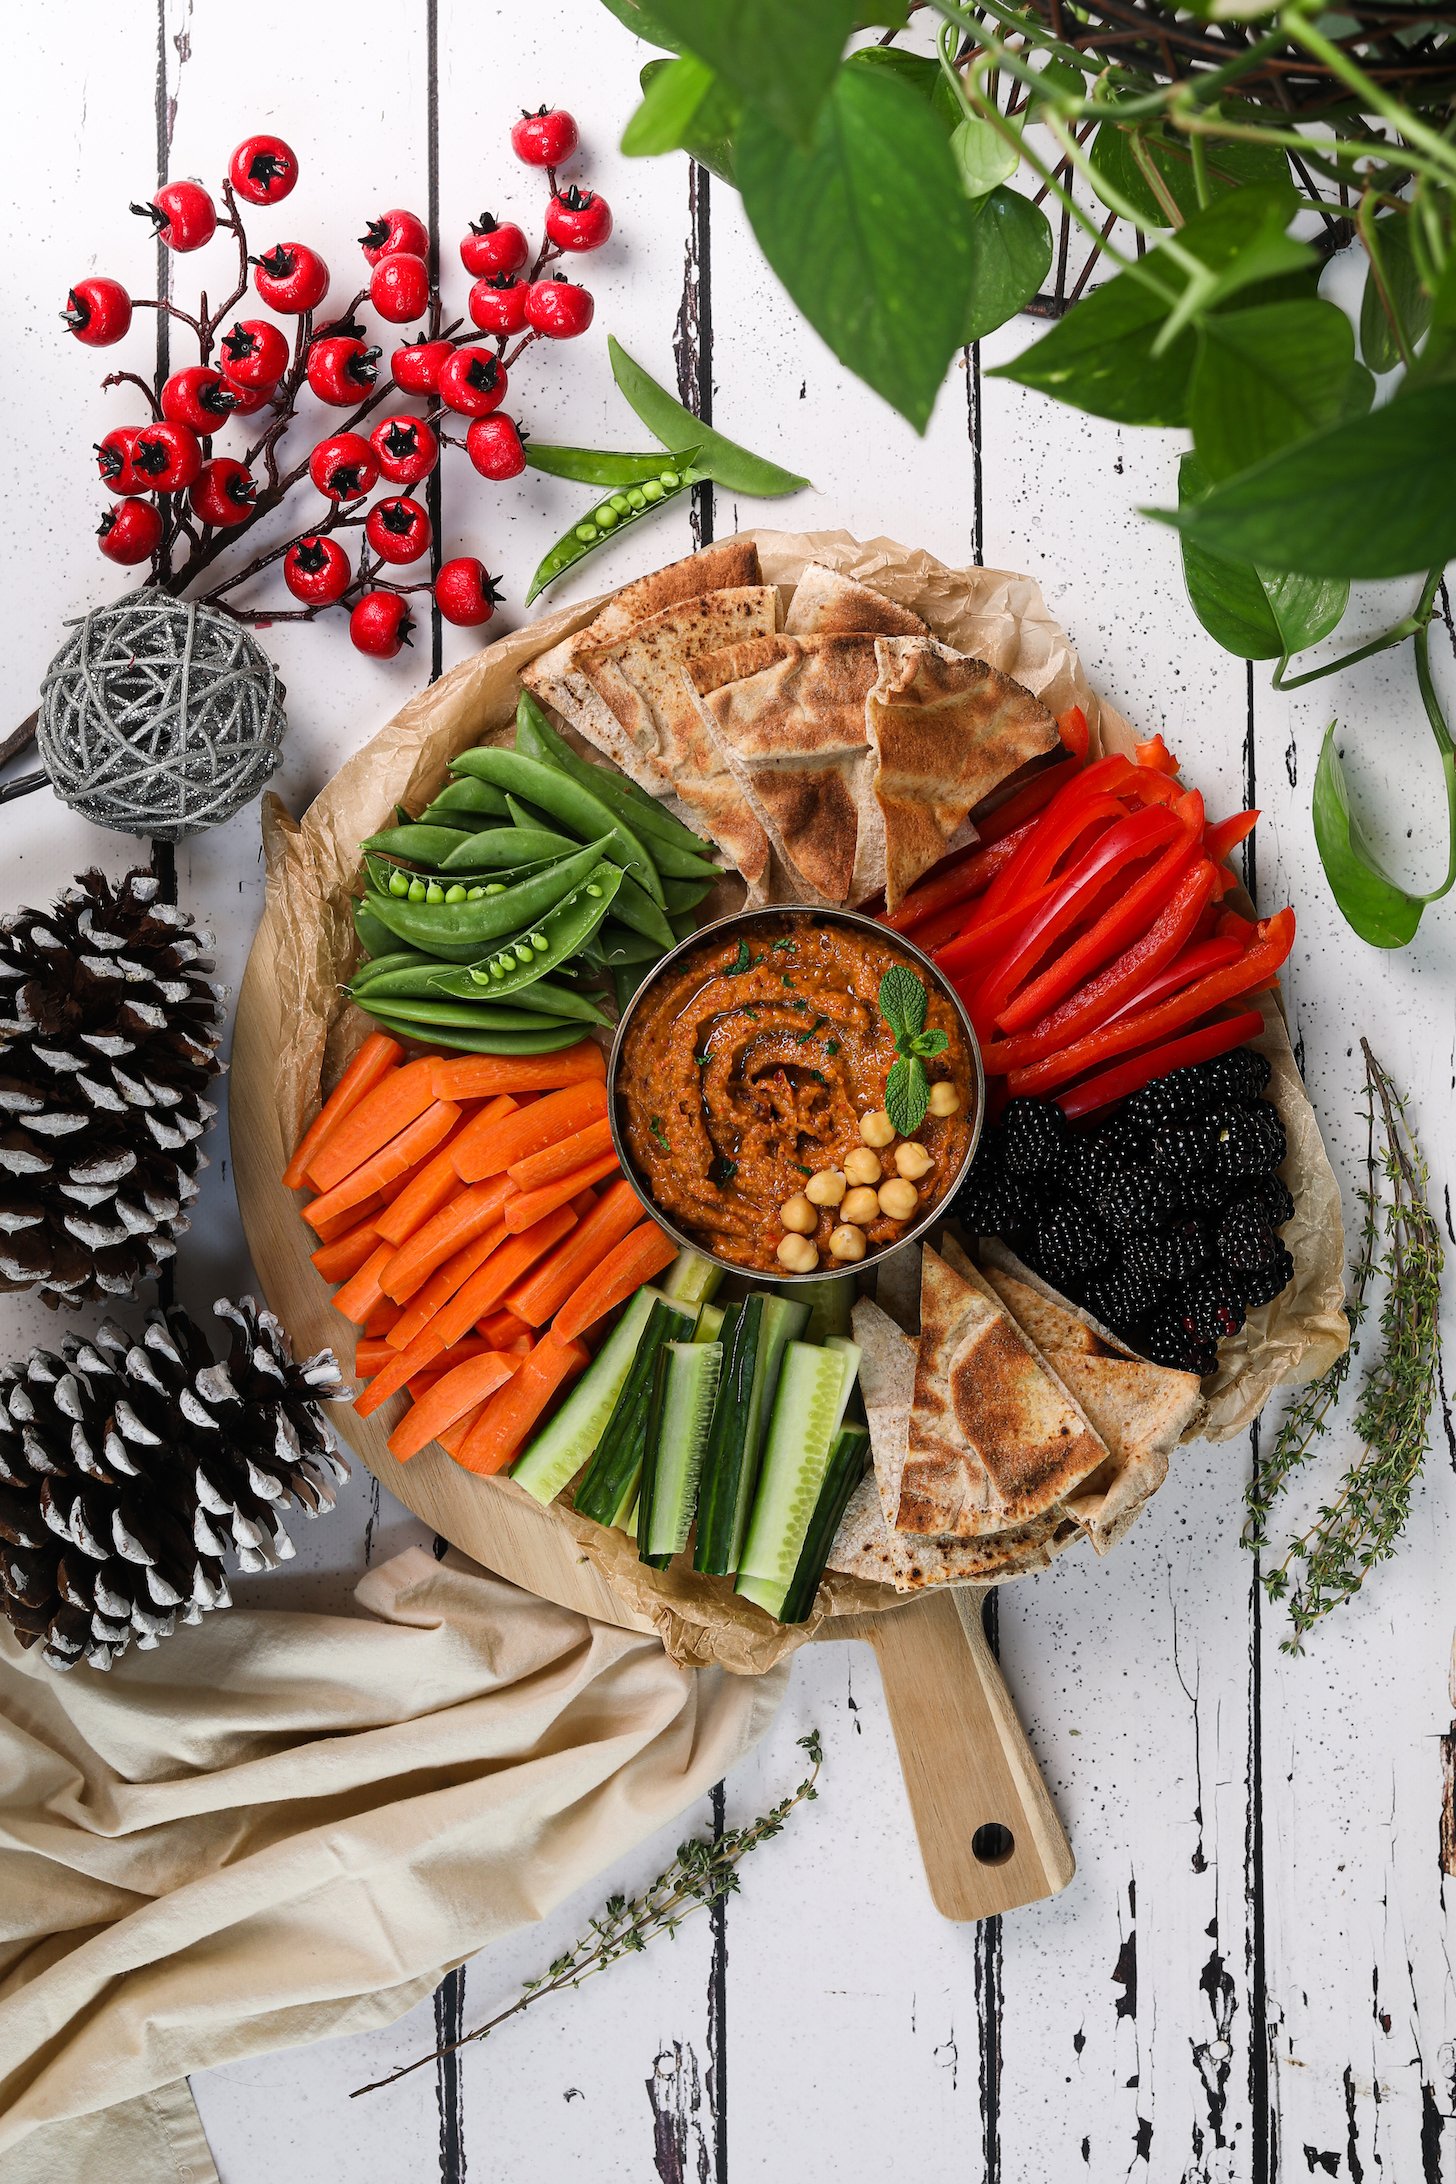 Overhead image of a vibrant platter of veggies, berries, pita and hummus styled with a holiday theme.